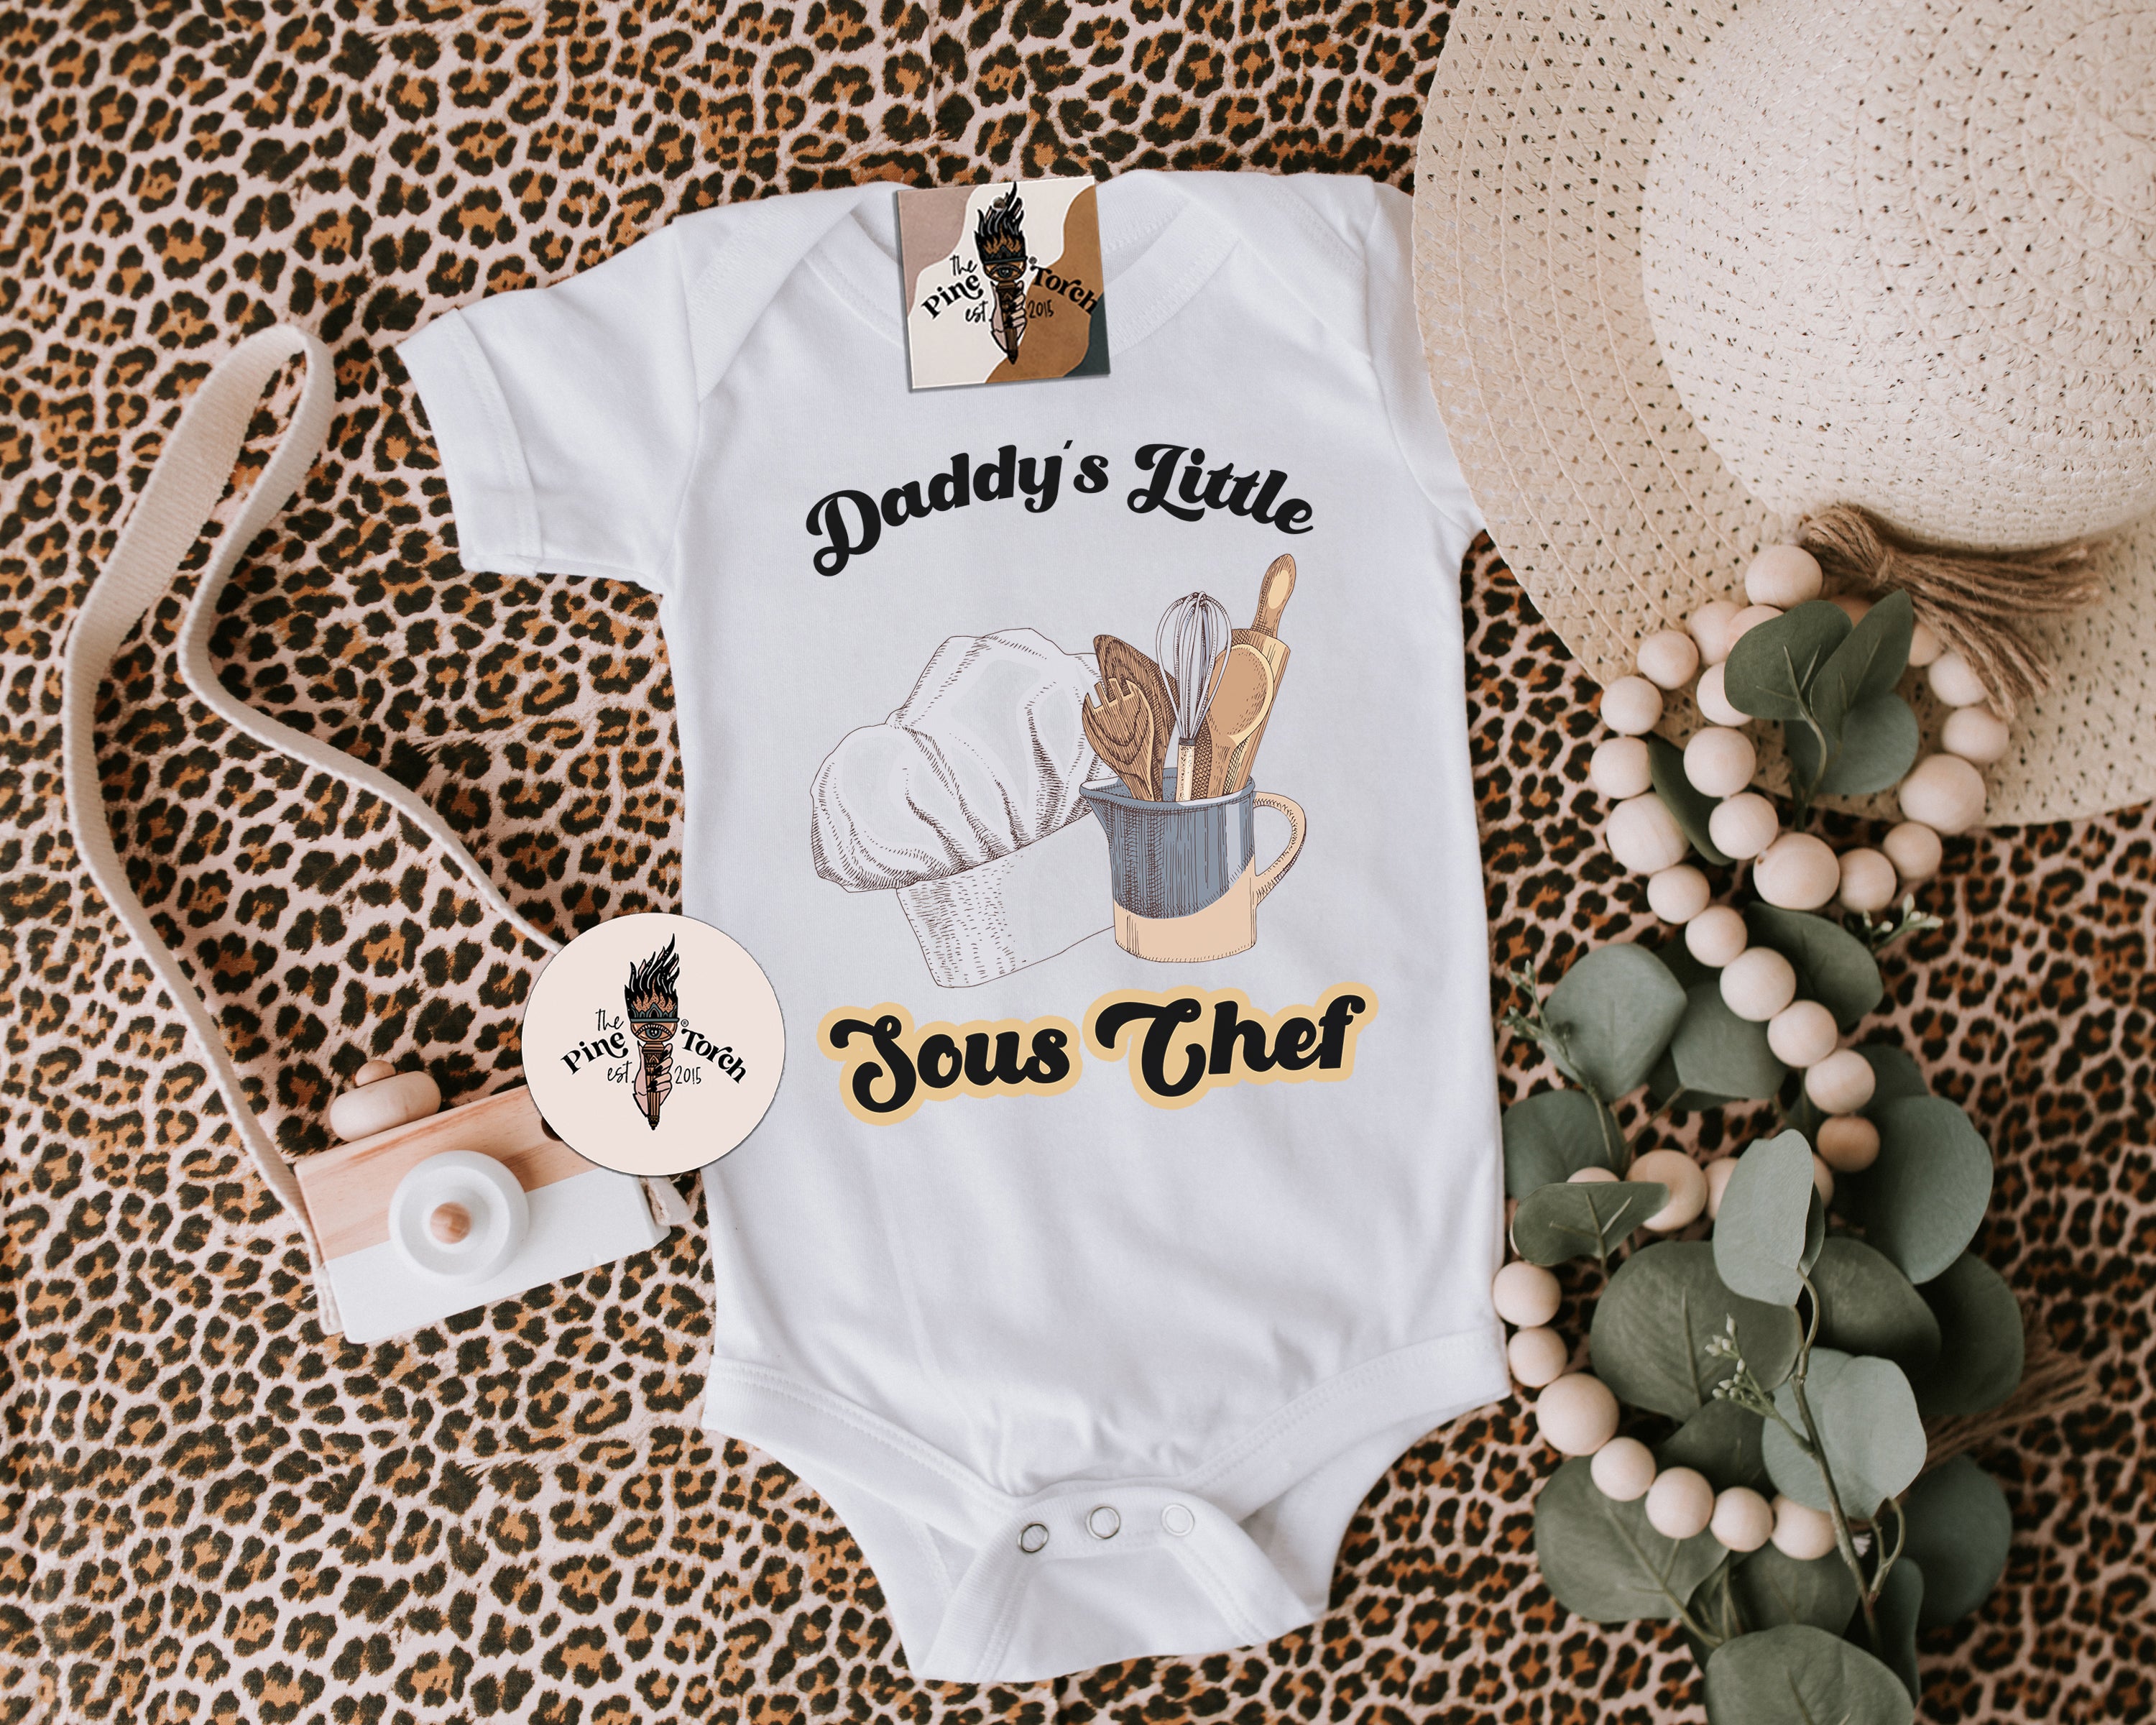 « DADDY'S LITTLE SOUS CHEF » BODYSUIT